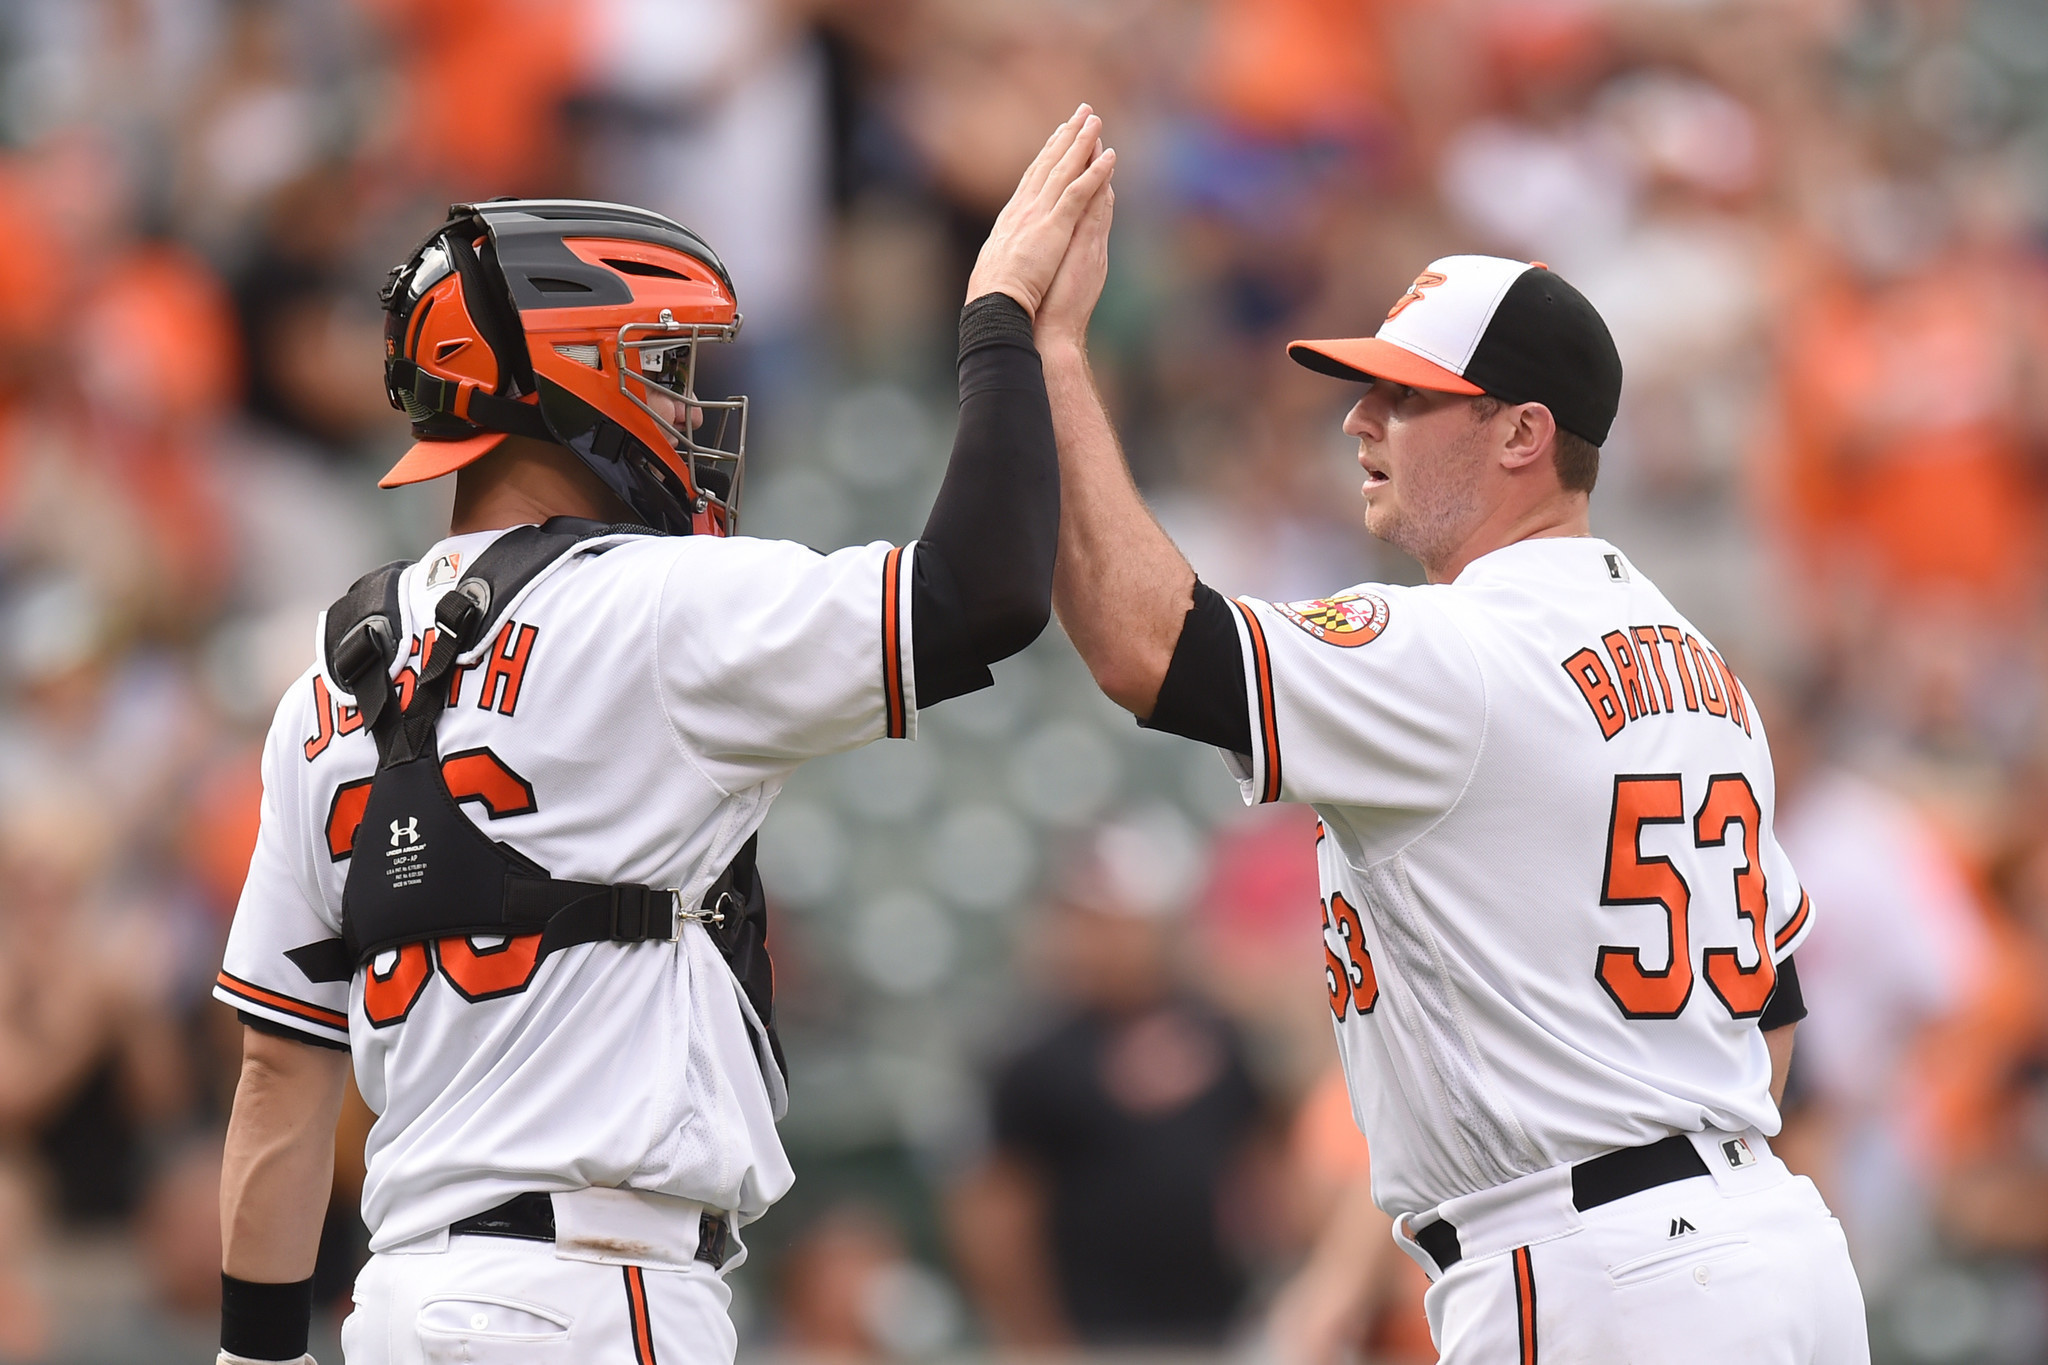 What a relief: Orioles find way to maintain bullpen consistency few can match